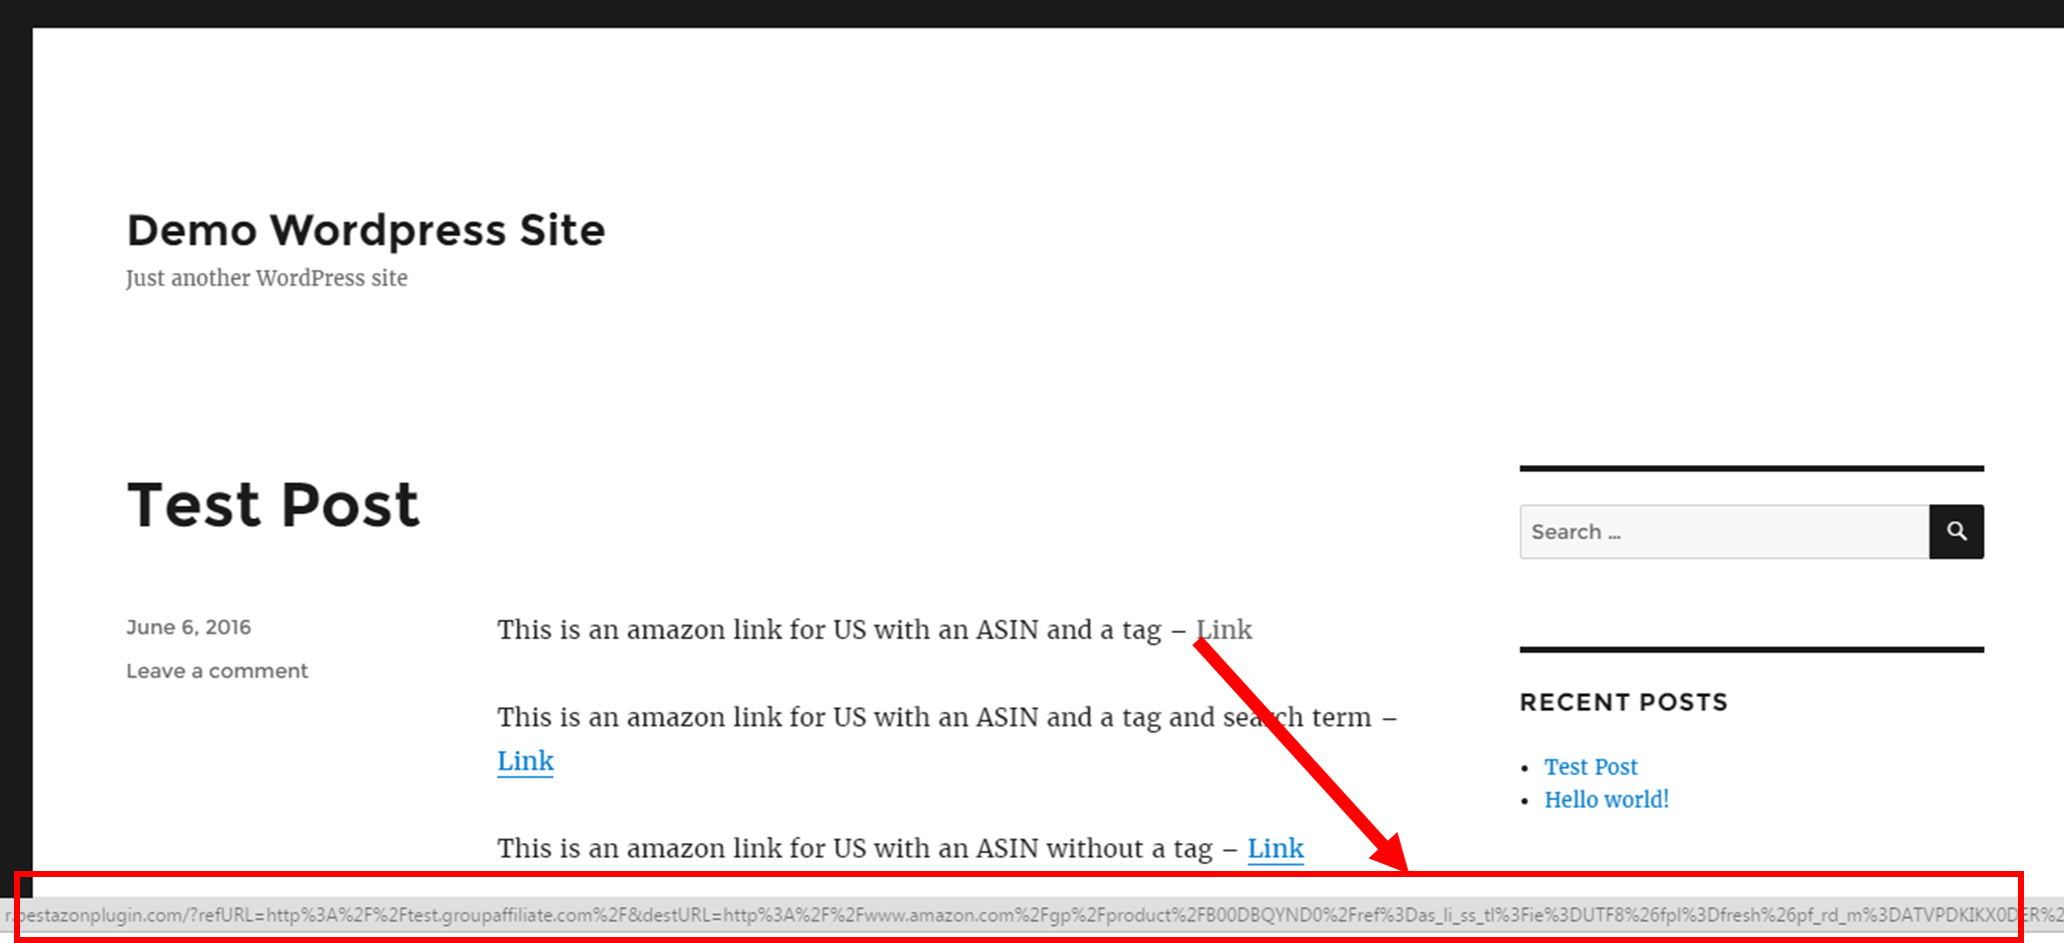 Once its done, the visitor is automatically redirected to the Amazon store in their country with your affiliate ID